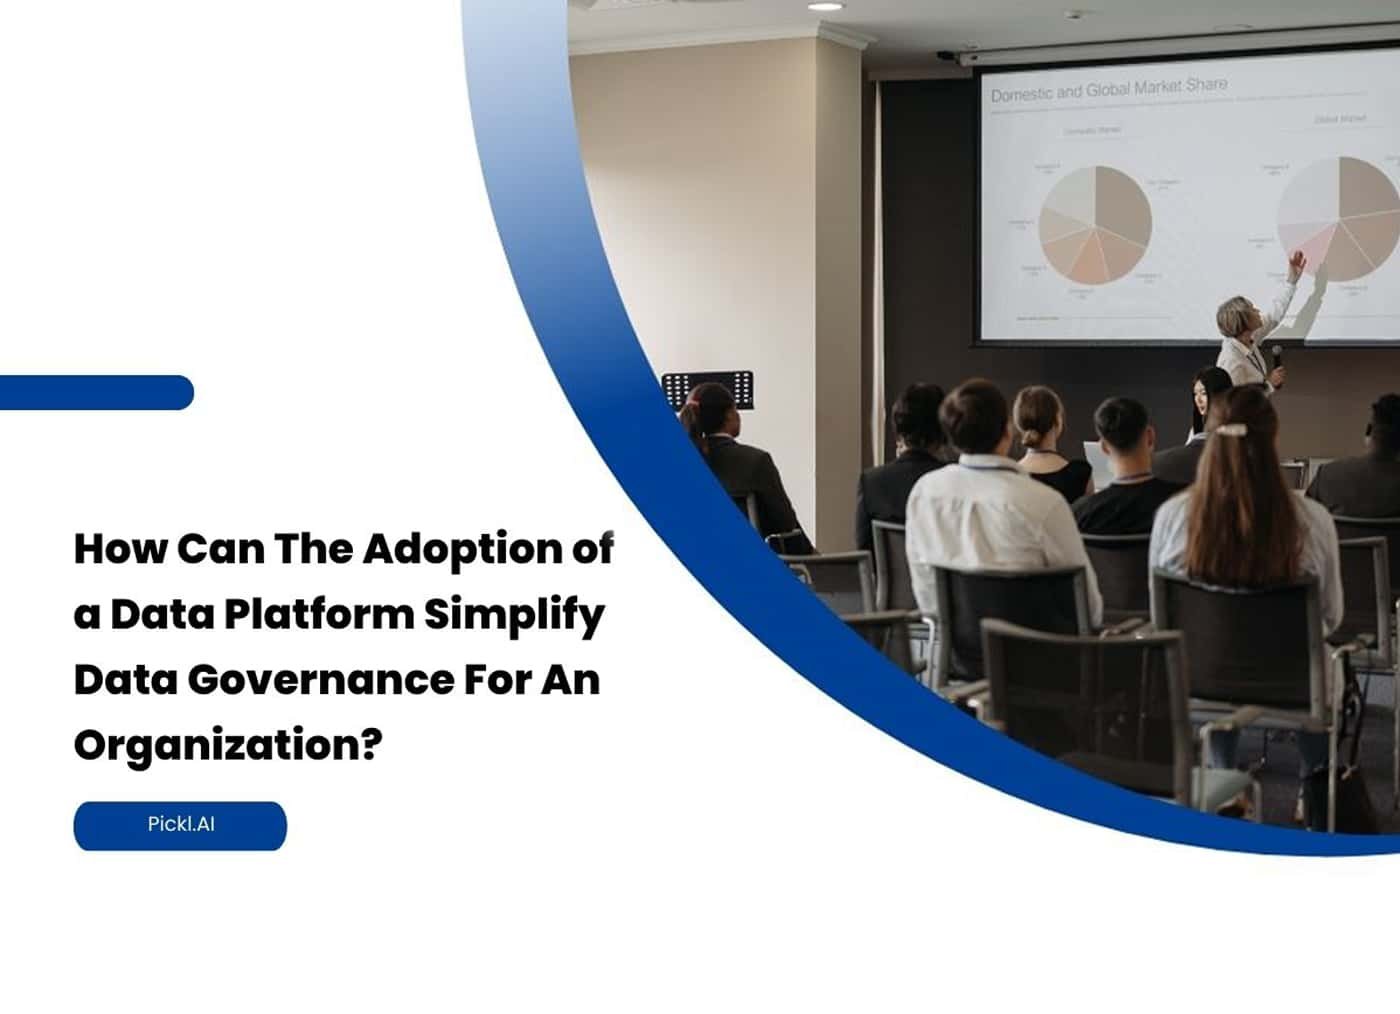 How Can The Adoption of a Data Platform Simplify Data Governance For An Organization?